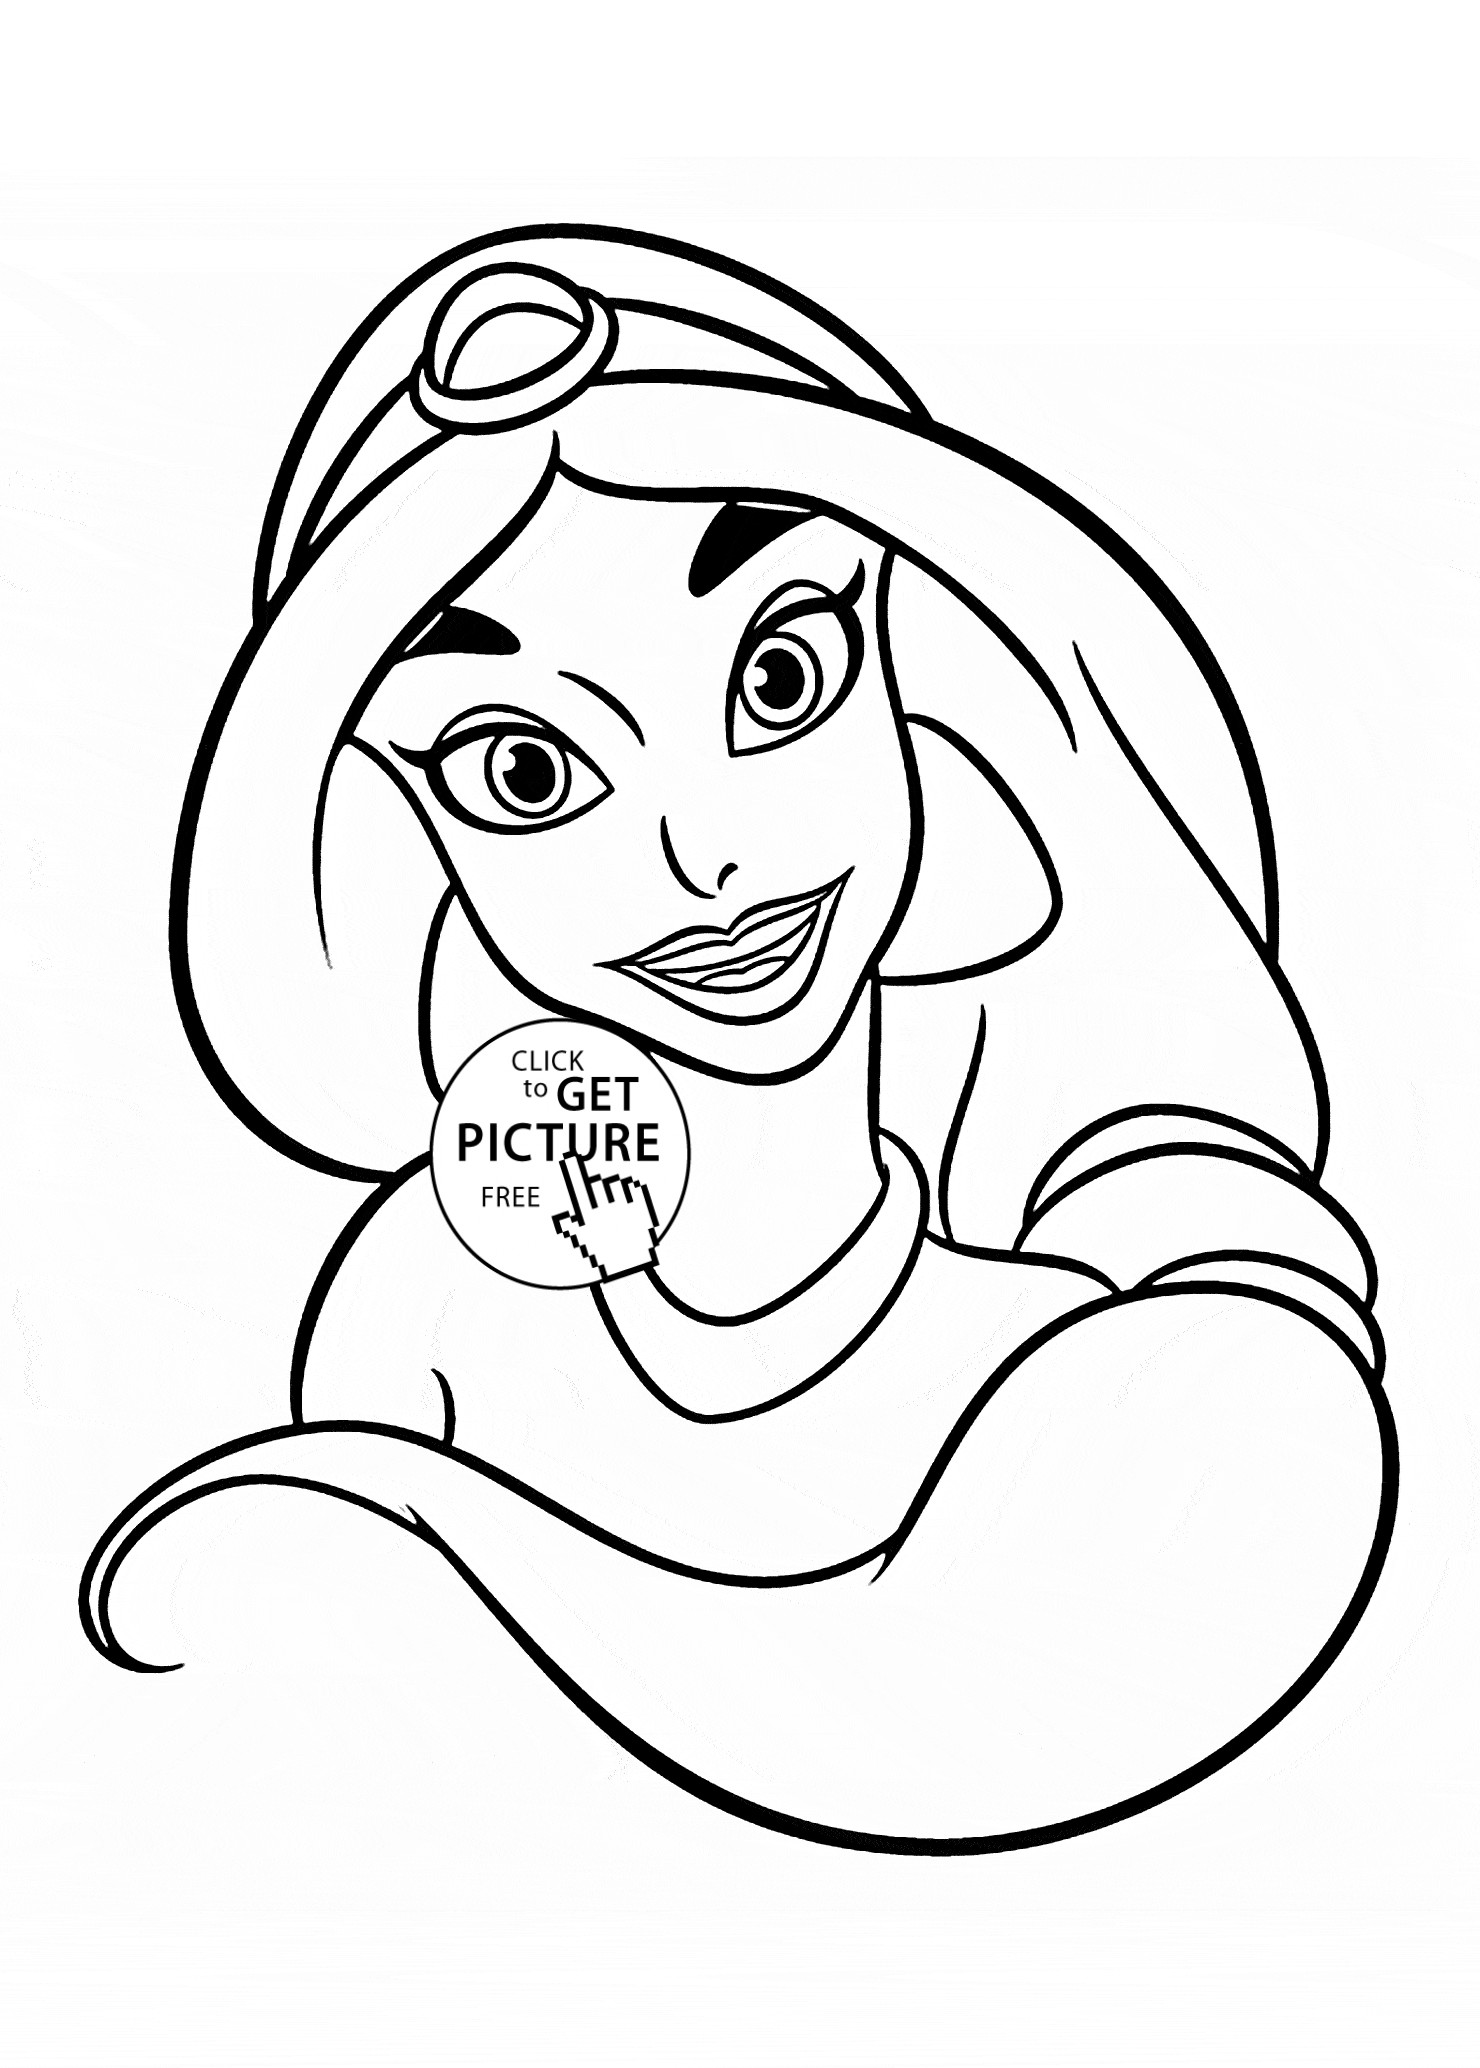 Easy Coloring Pages For Girls
 Disney Princess Jasmine face coloring page for kids